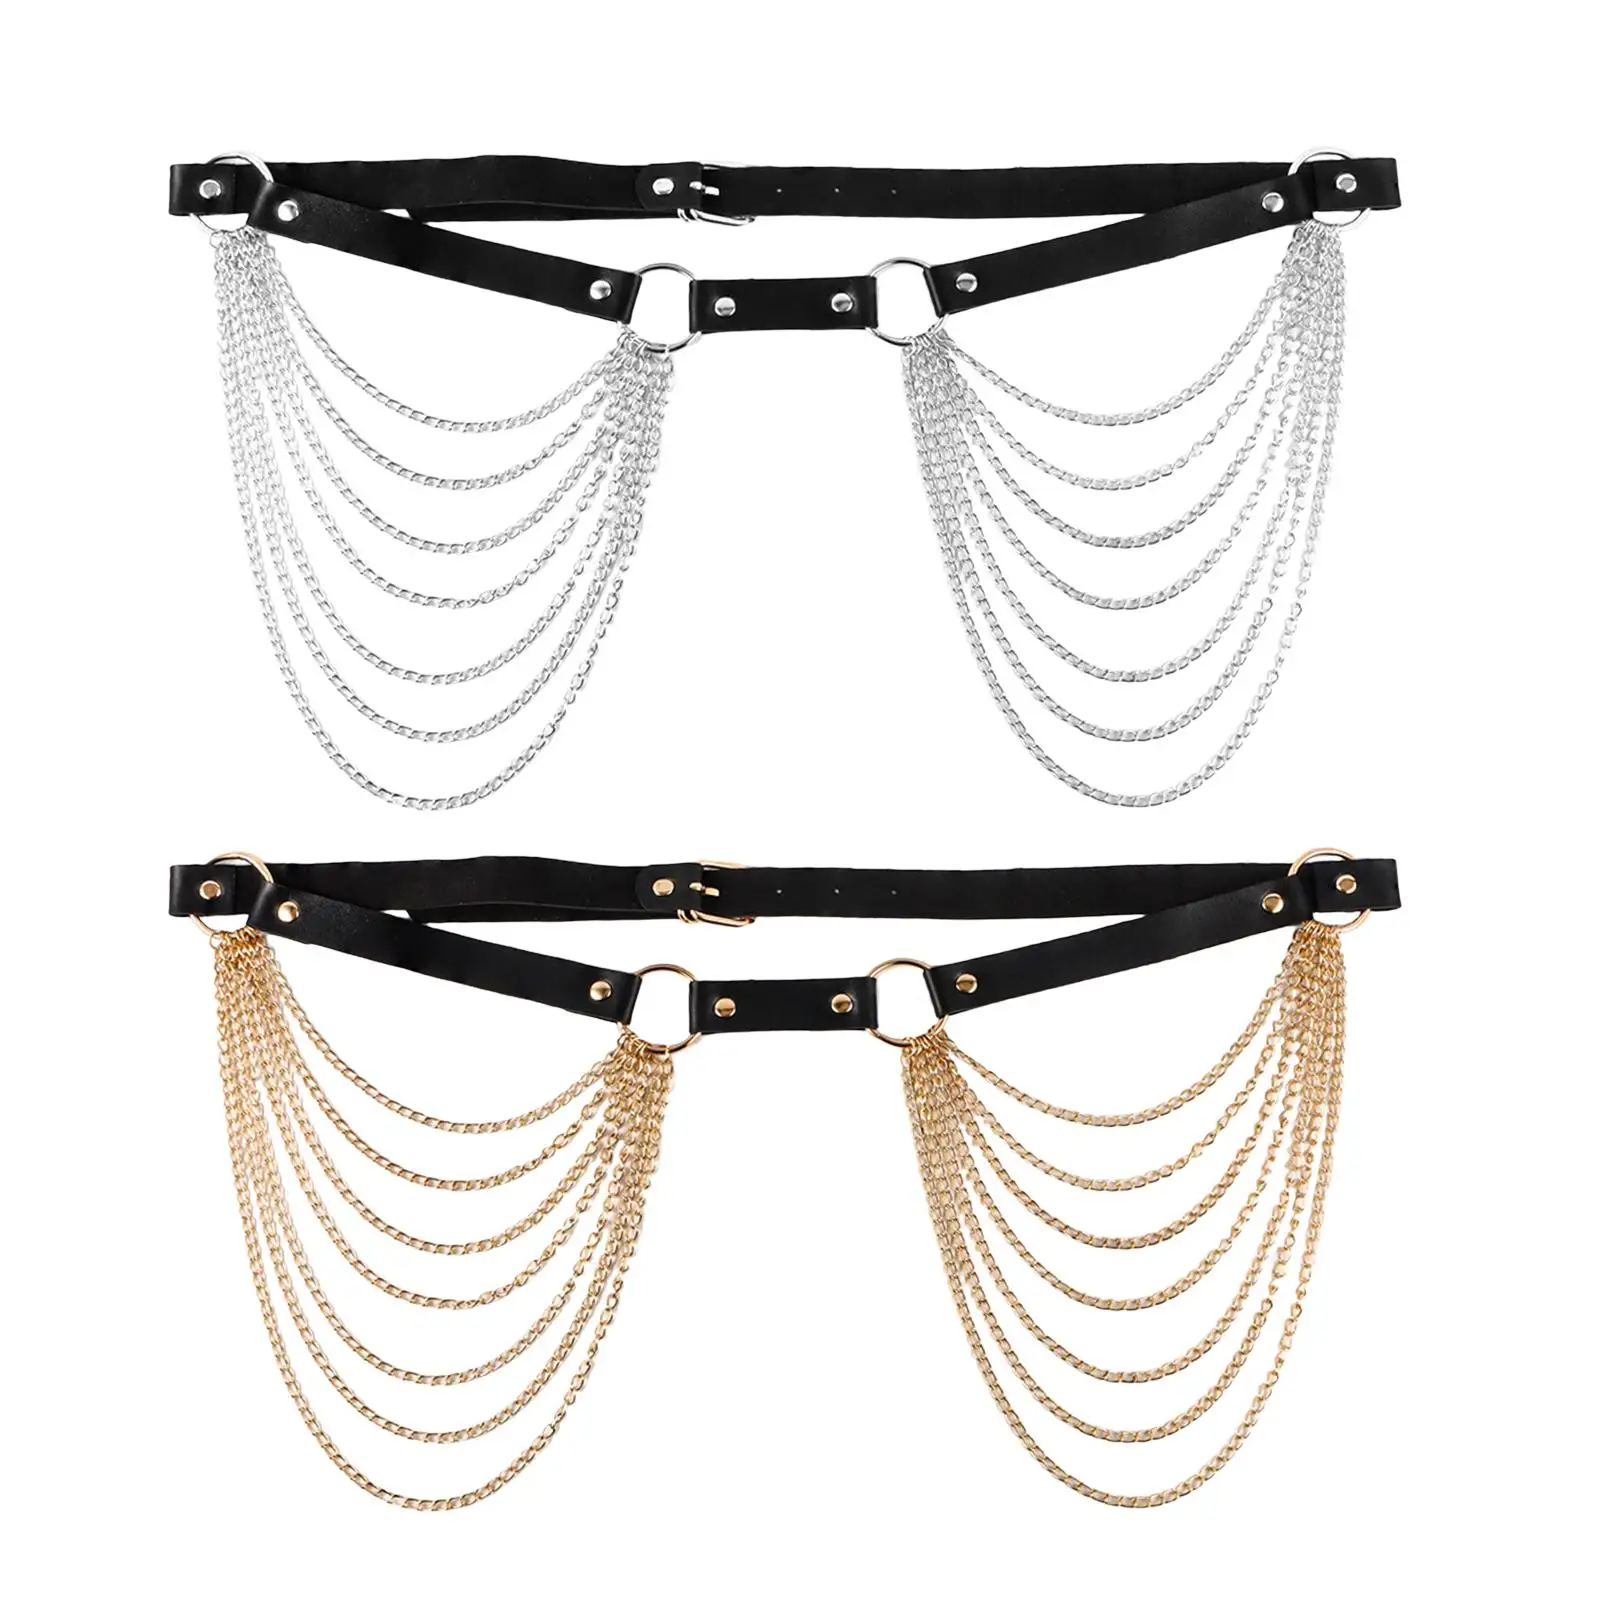 Waist Belt with Chain Hiphop Punk Body Jewelry Corset Belt Durable Accessories Decorative Cosplay Chain Belt for Nightclub Party